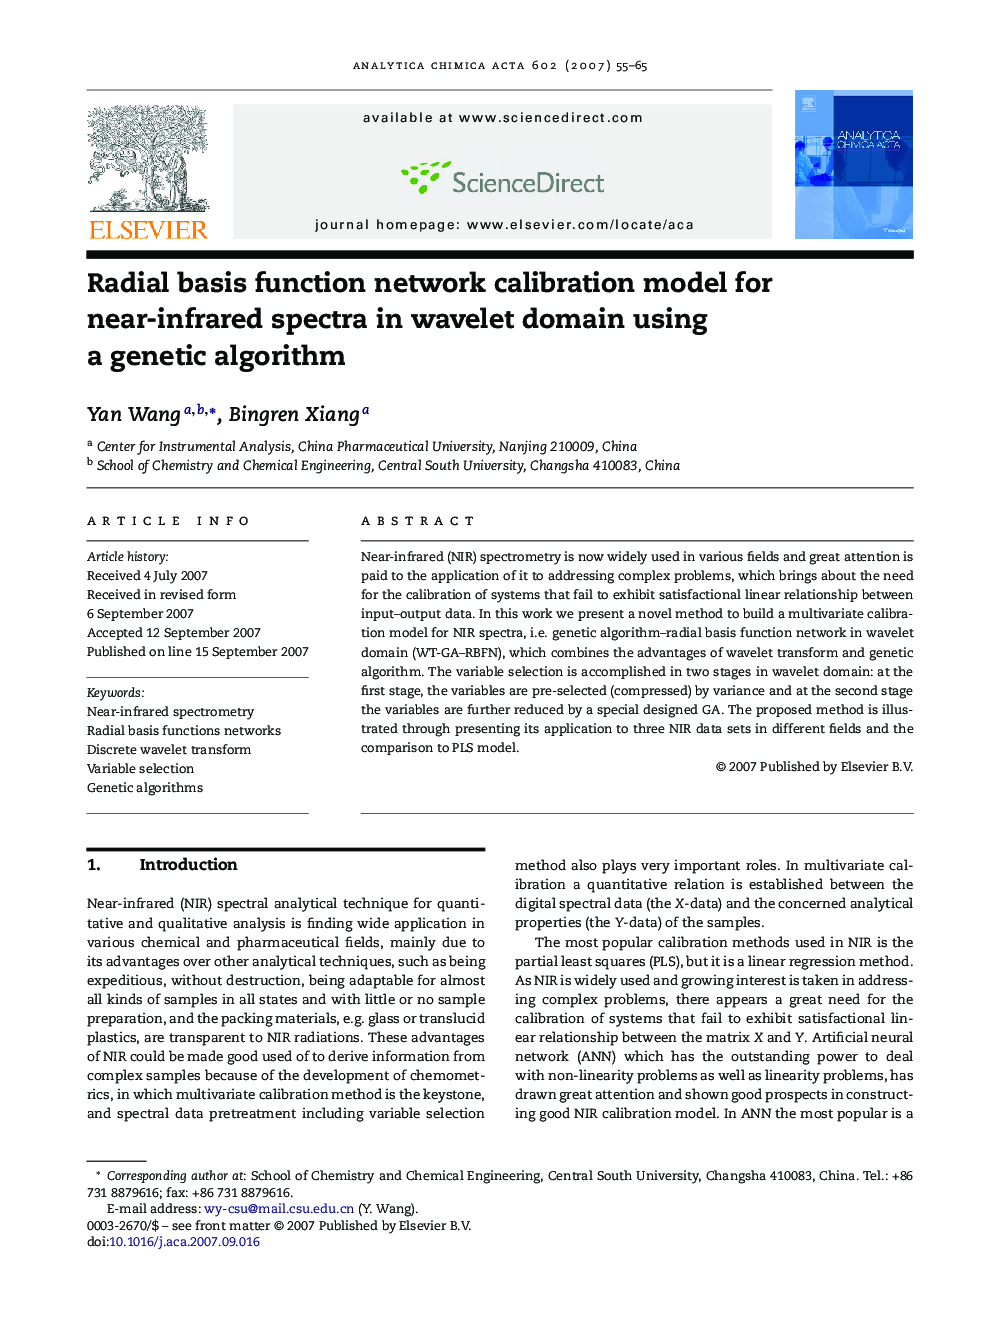 Radial basis function network calibration model for near-infrared spectra in wavelet domain using a genetic algorithm